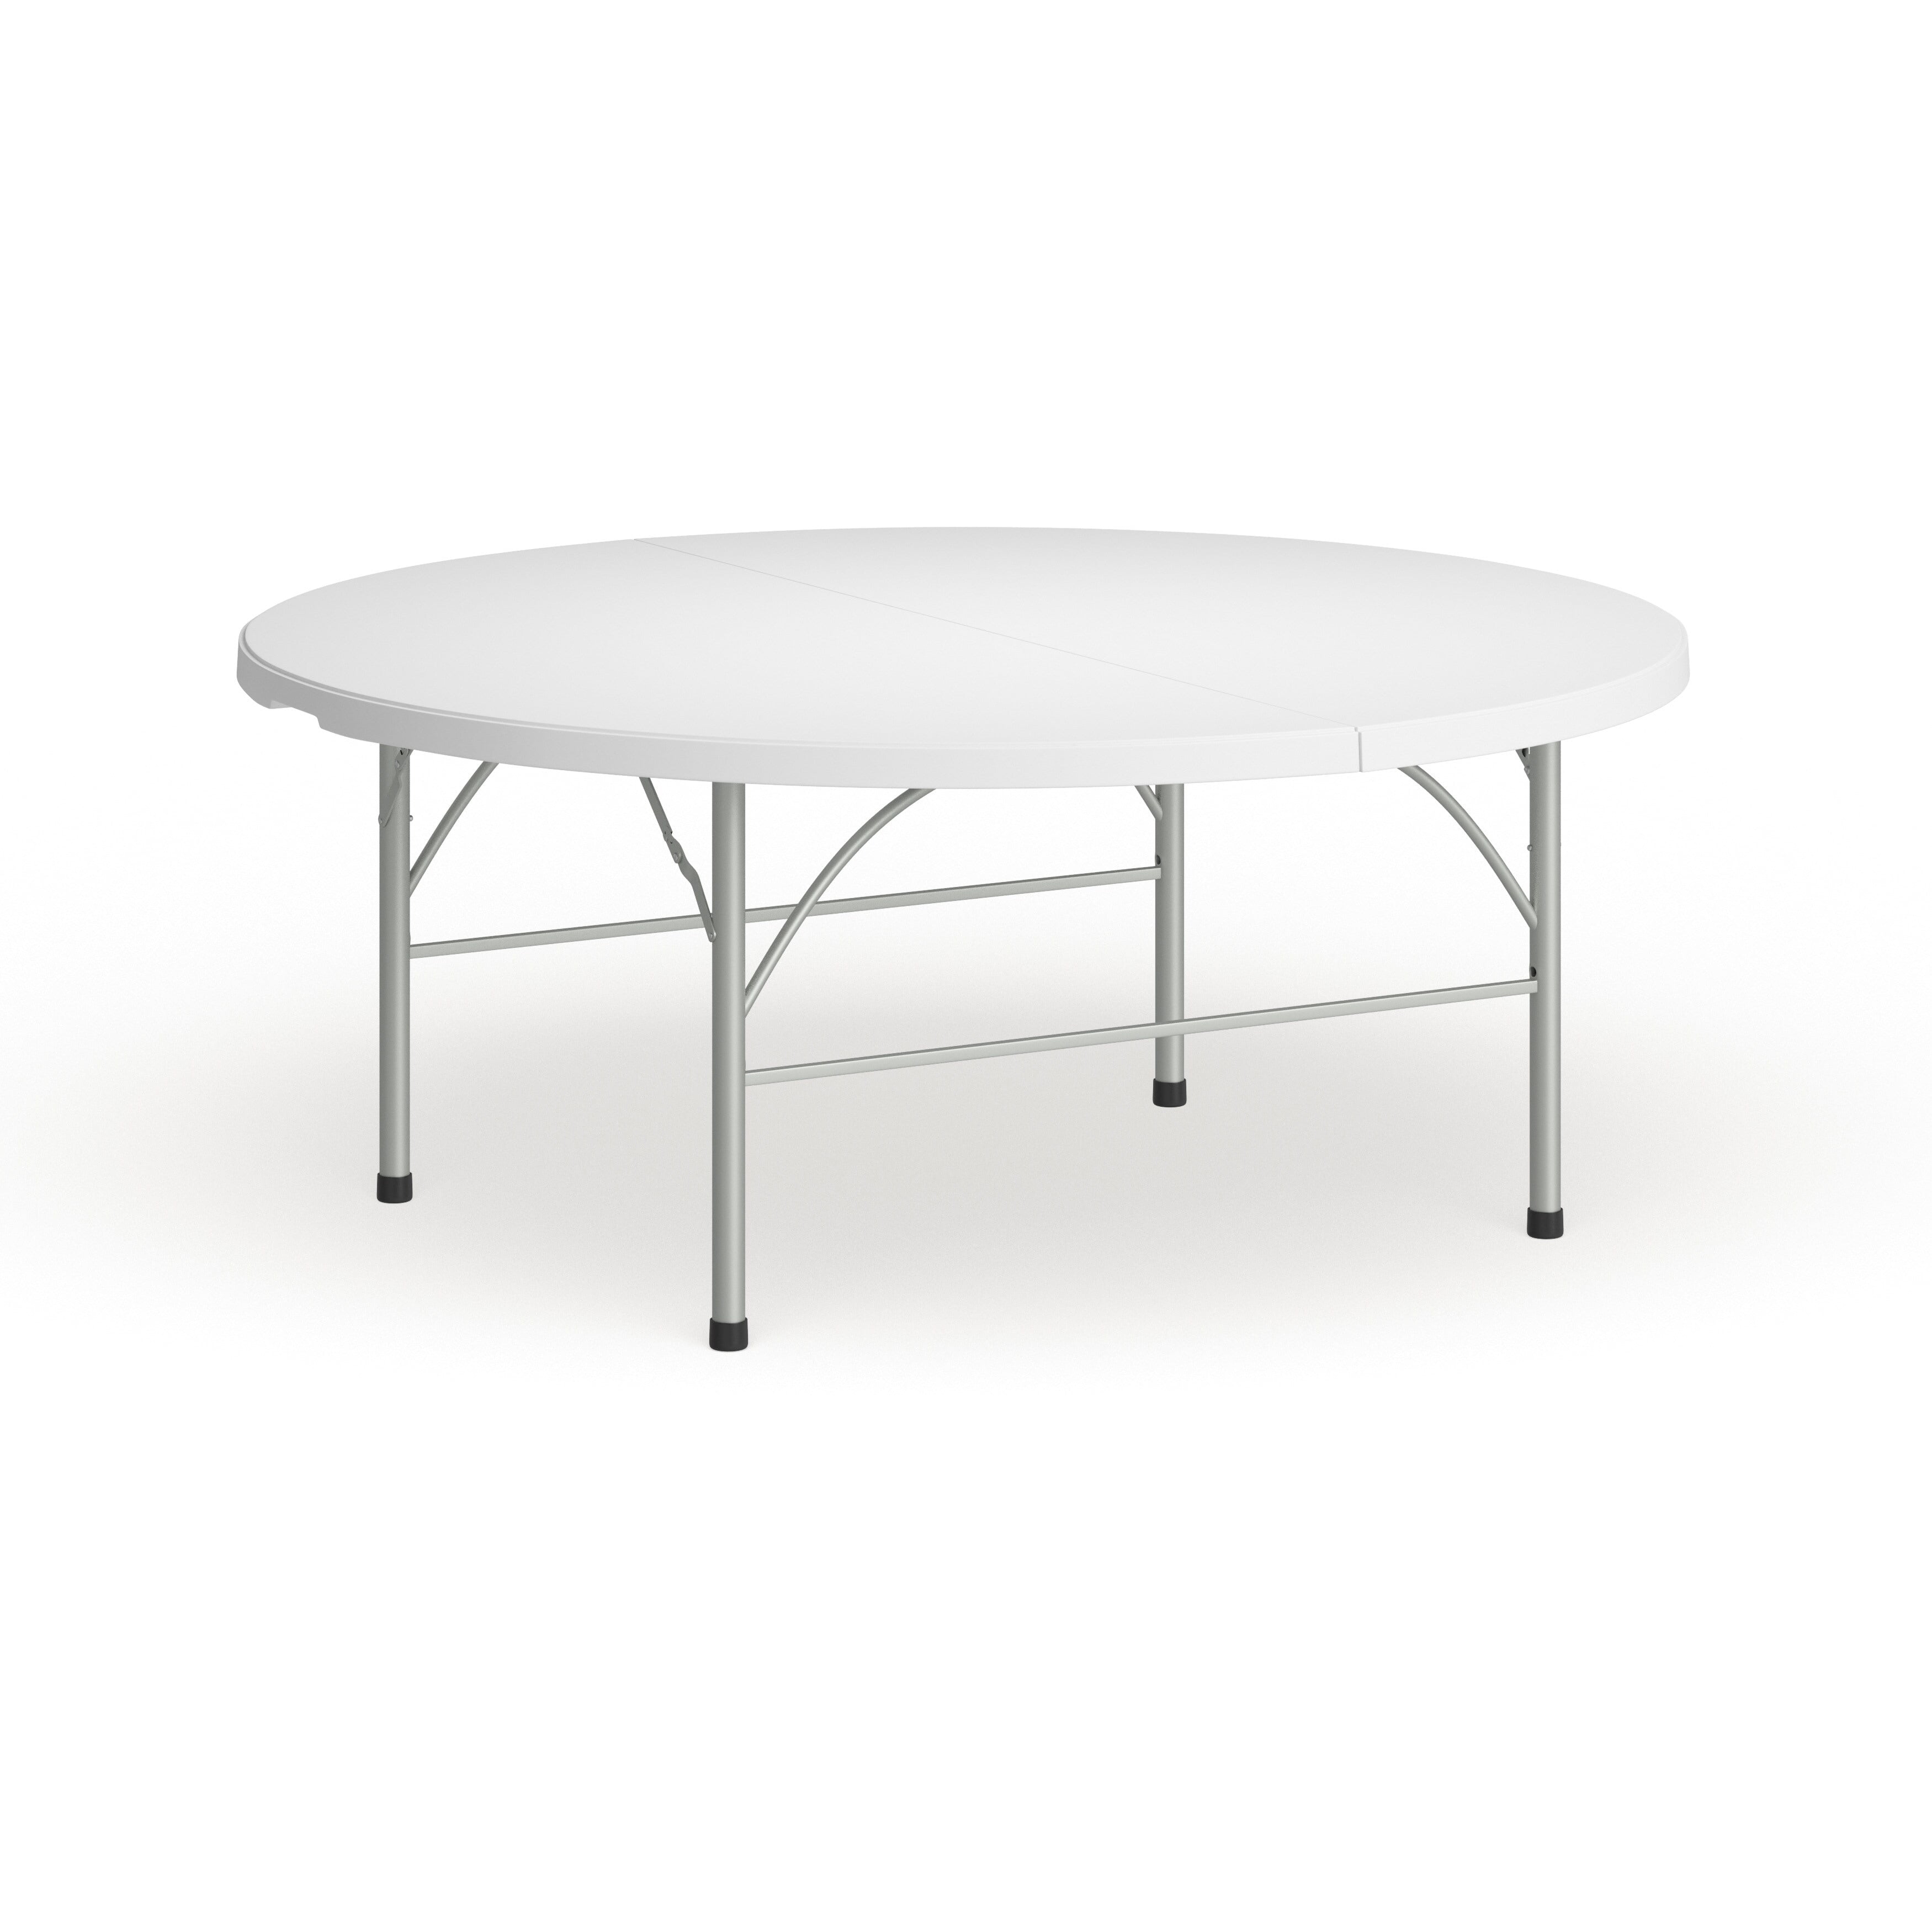 Lifetime 72 Inch Round Table 4 Pack, Lifetime Round Tables 720